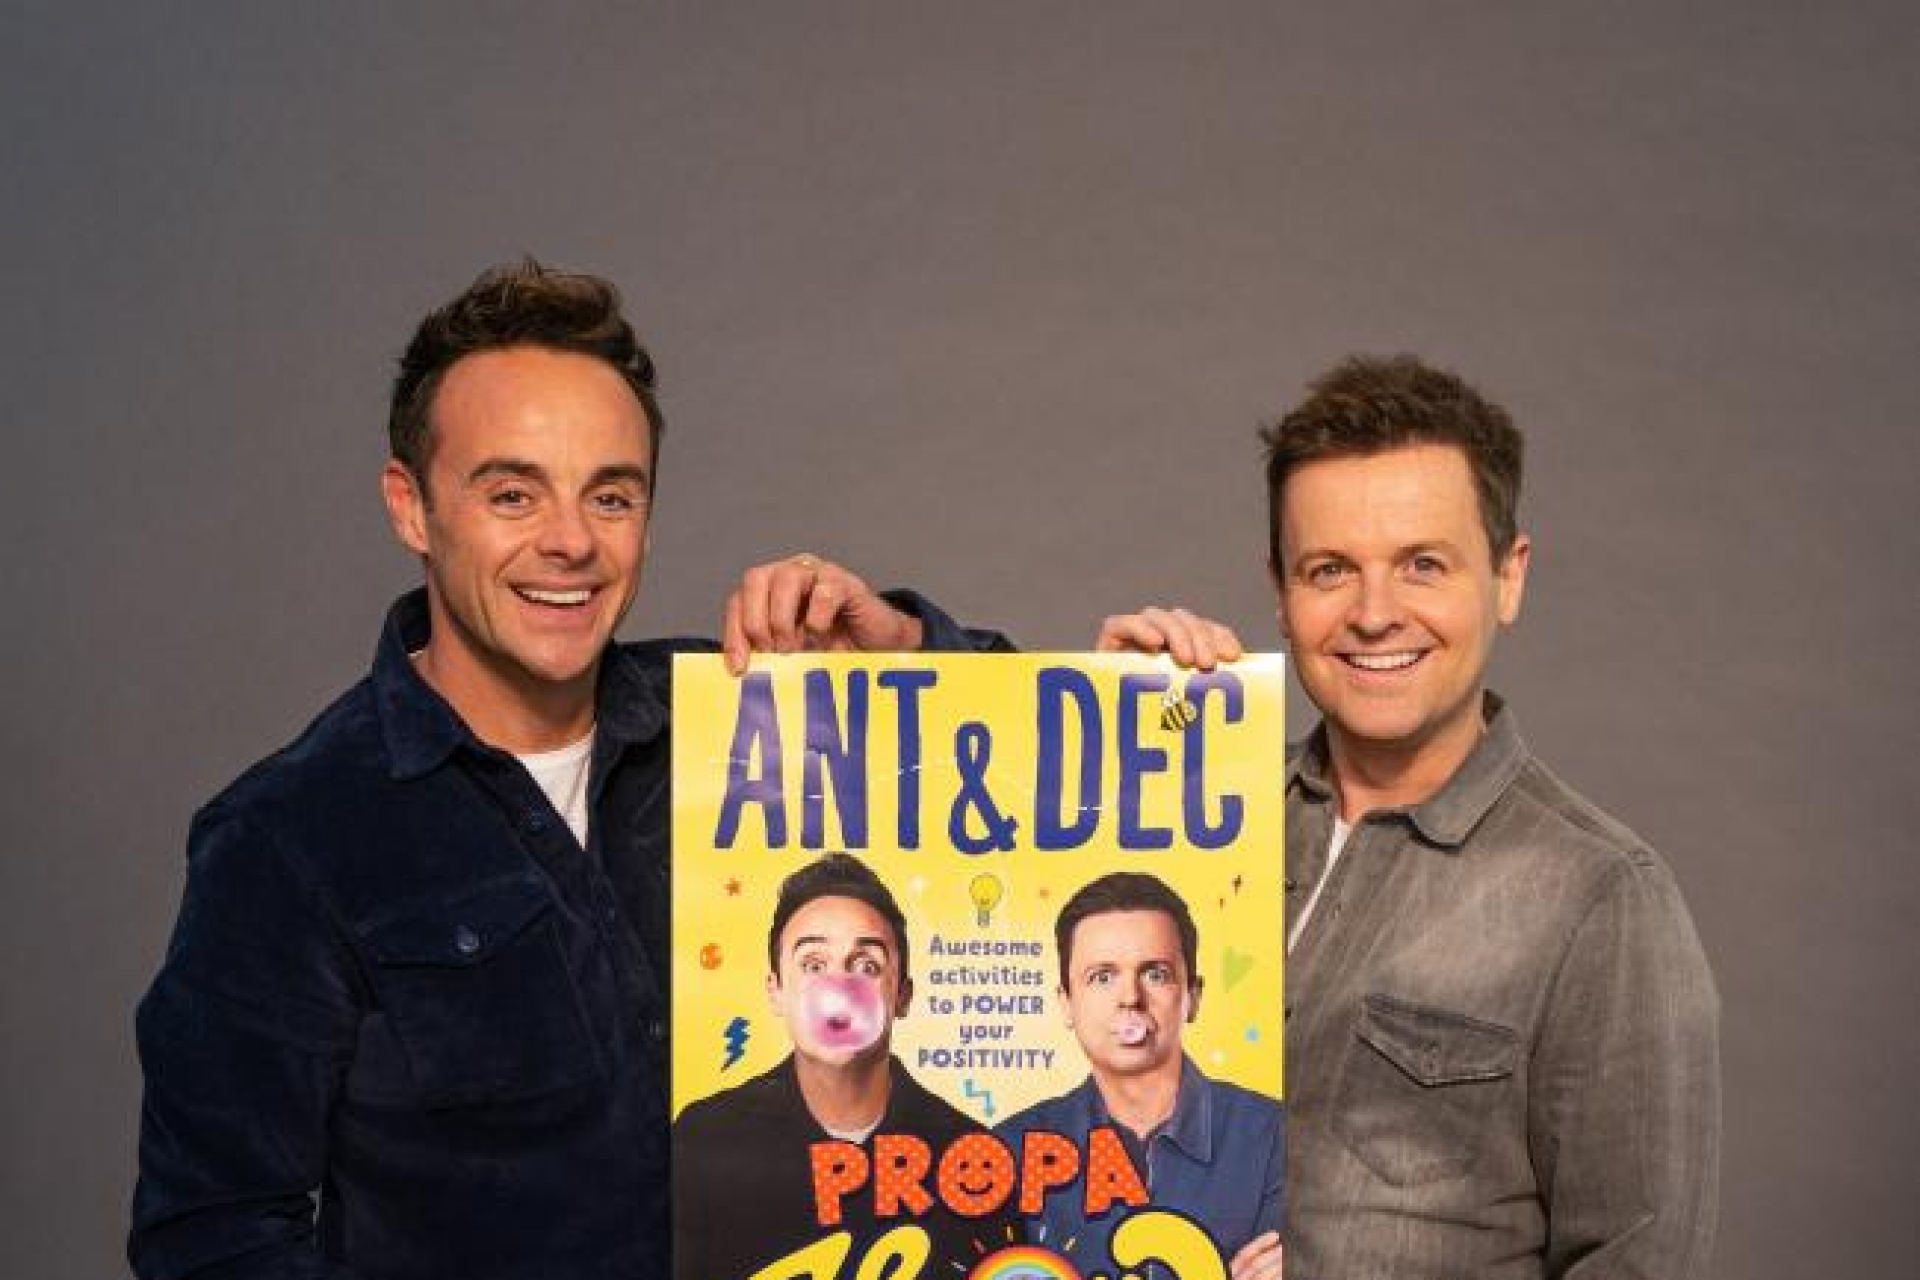 Ant & Dec announce the release of their debut children's book to raise funds for NSPCC